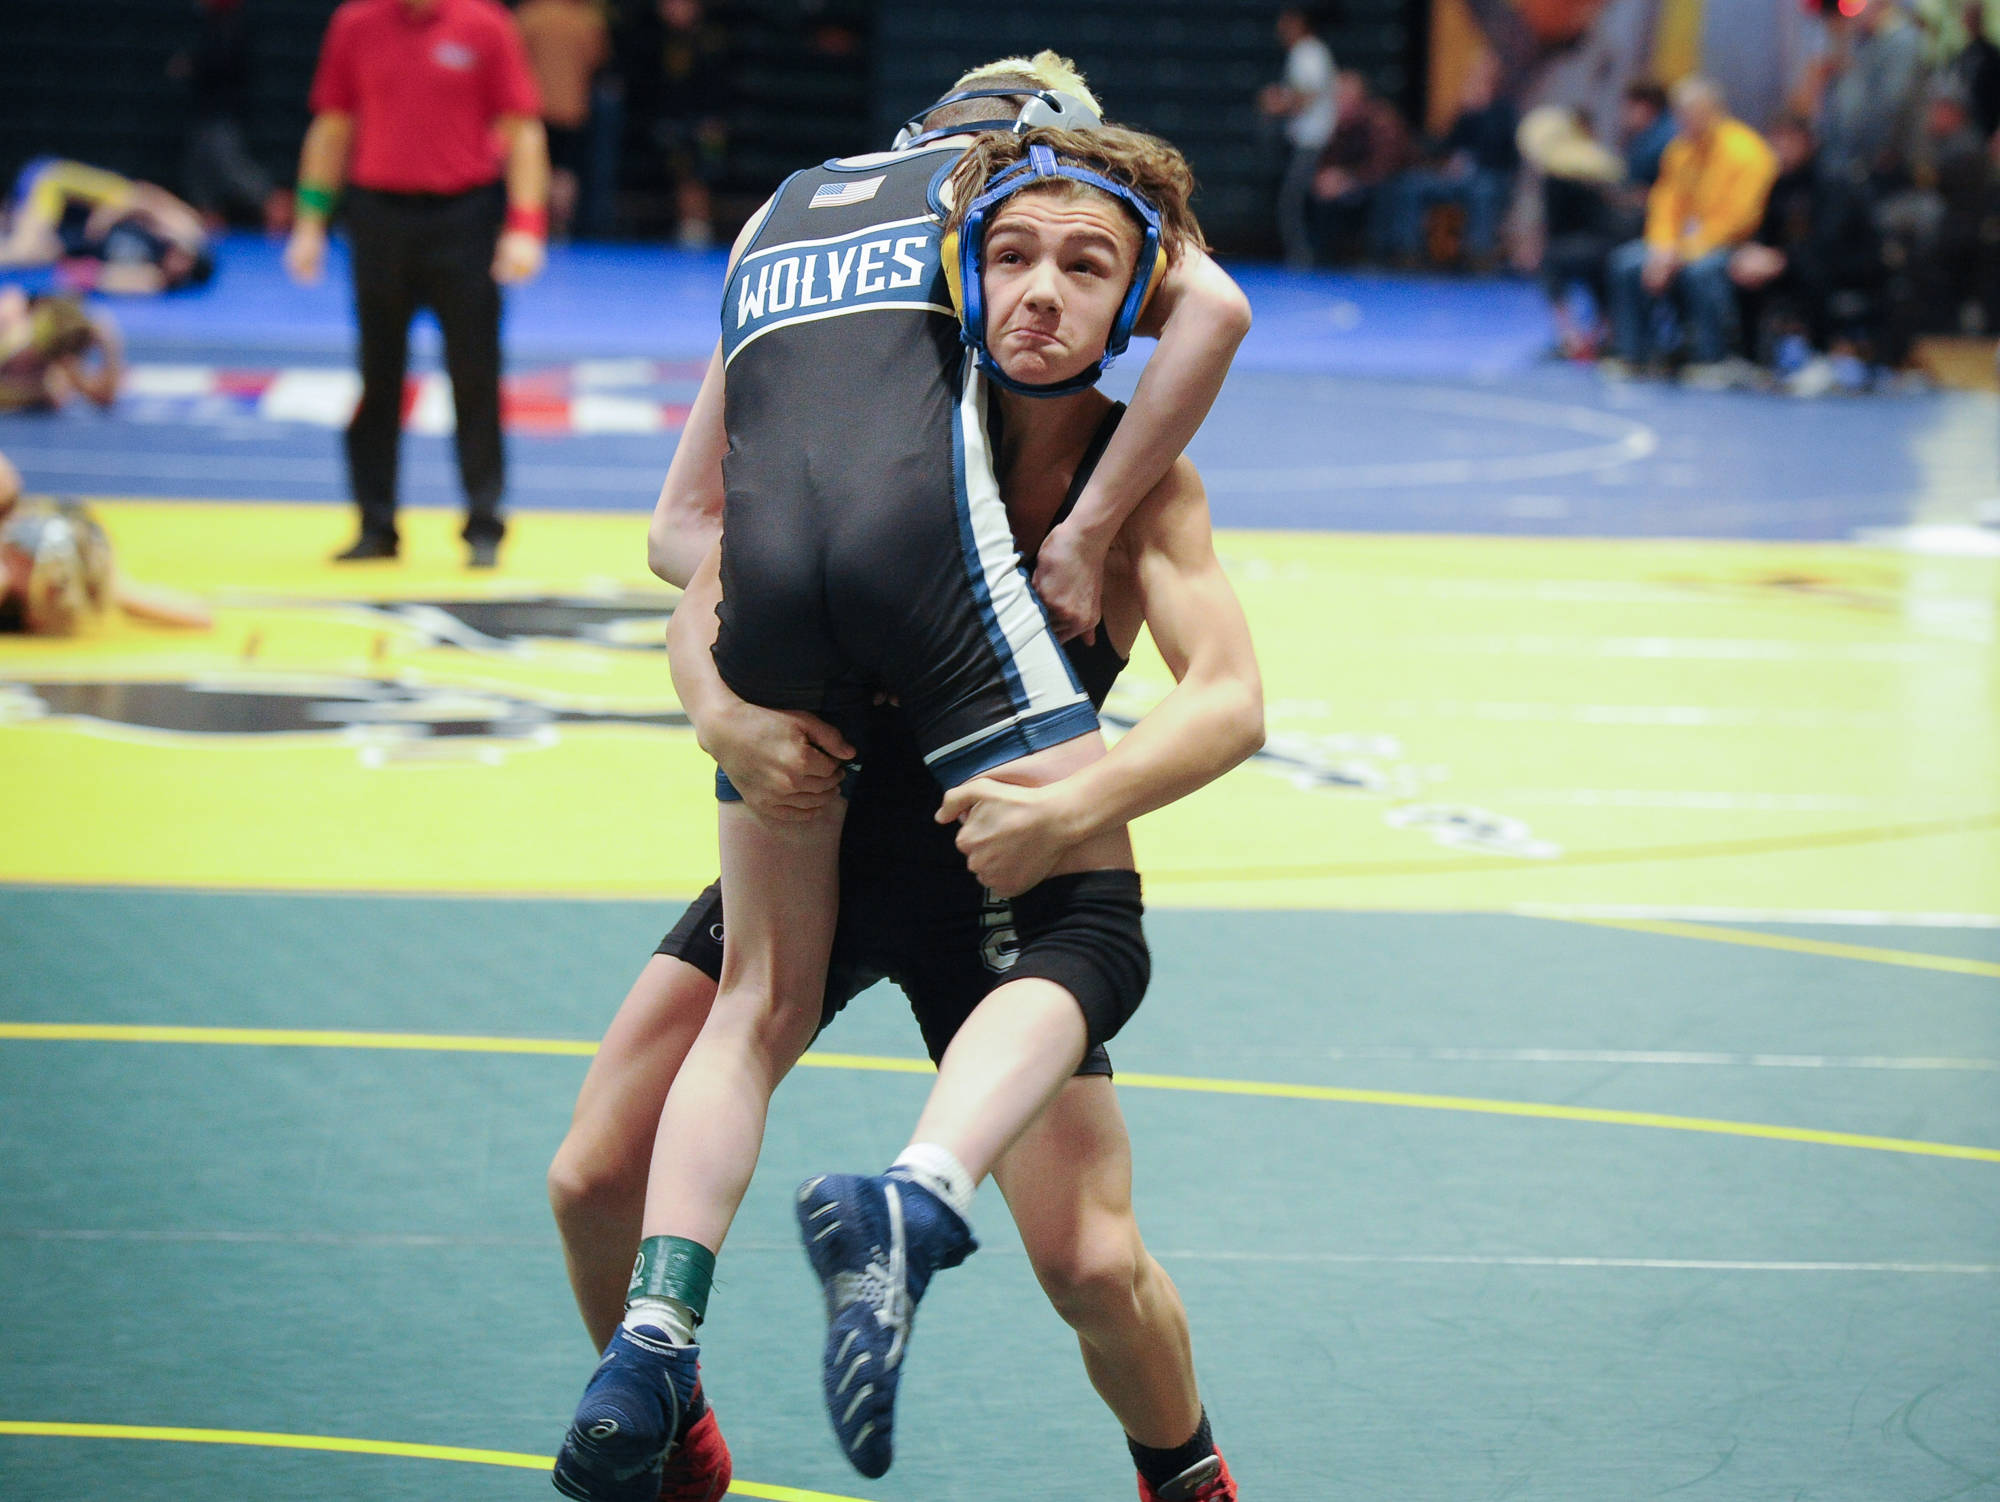 Thunder Mountain High School freshman Kadin Messmer picks up Eagle River’s Kameron Potter in the second round of the 103-pound consolation bracket at the ASAA/First National Bank Alaska Division I State Wrestling Championships at the Alaska Airlines Center in Anchorage on Saturday, Dec. 15, 2018. Messmer pinned Potter at 1:27 of the first period. (Michael Dinneen | For the Juneau Empire)